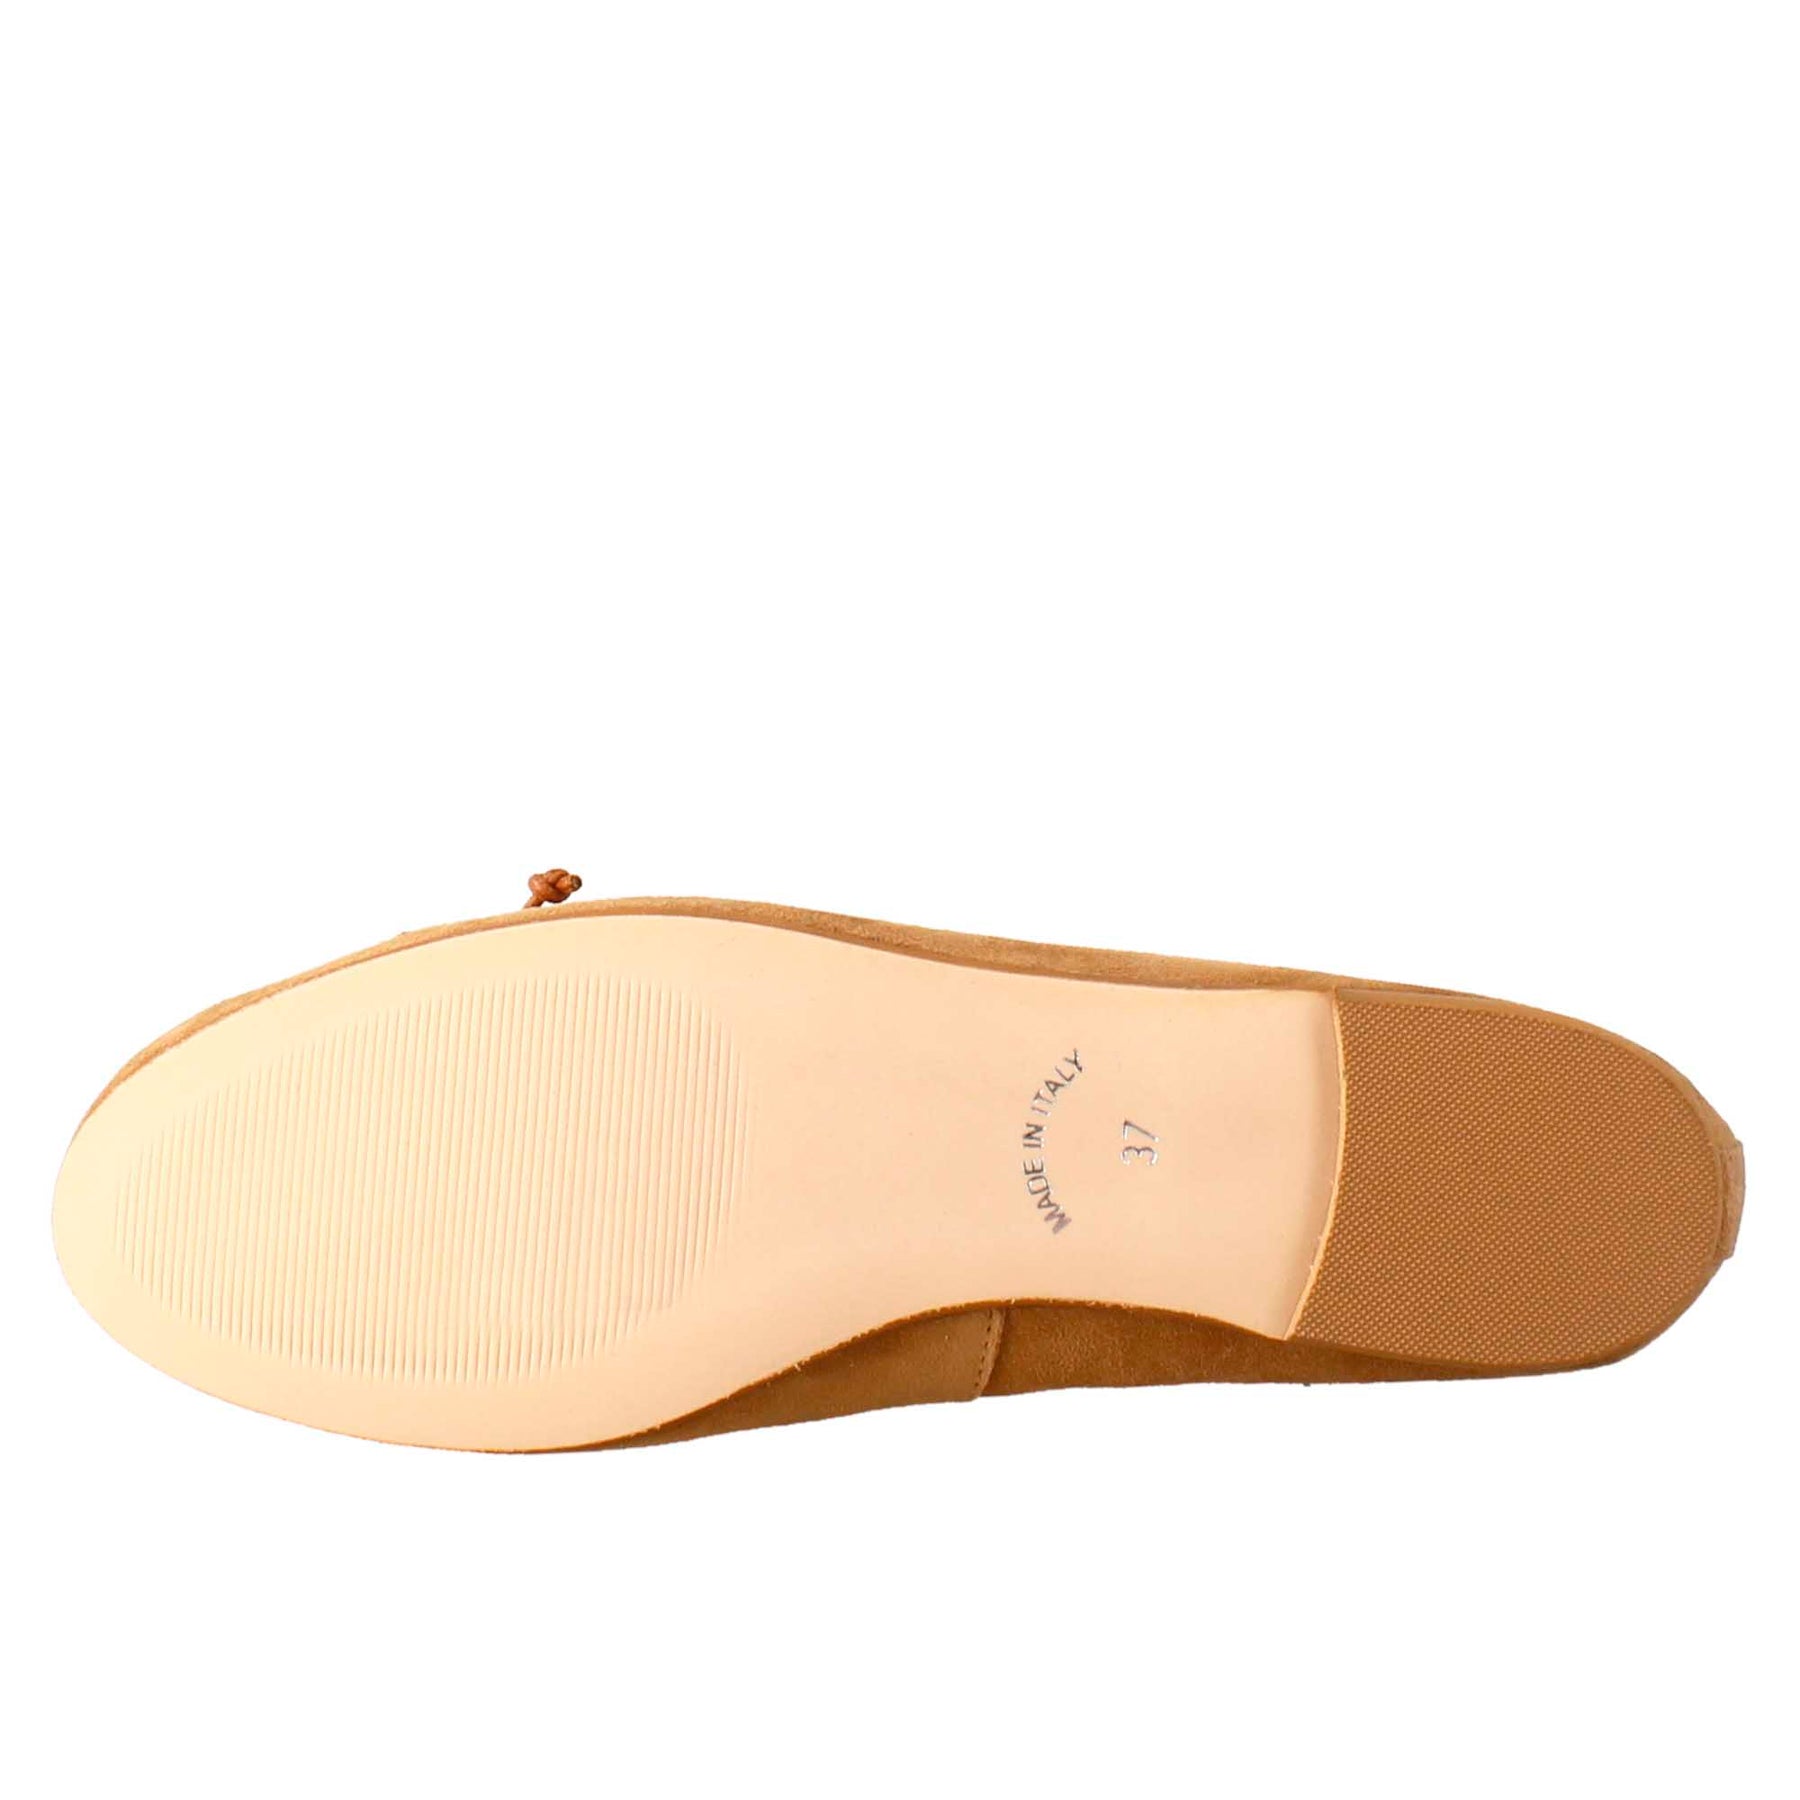 Light brown suede women's ballet flats without lining